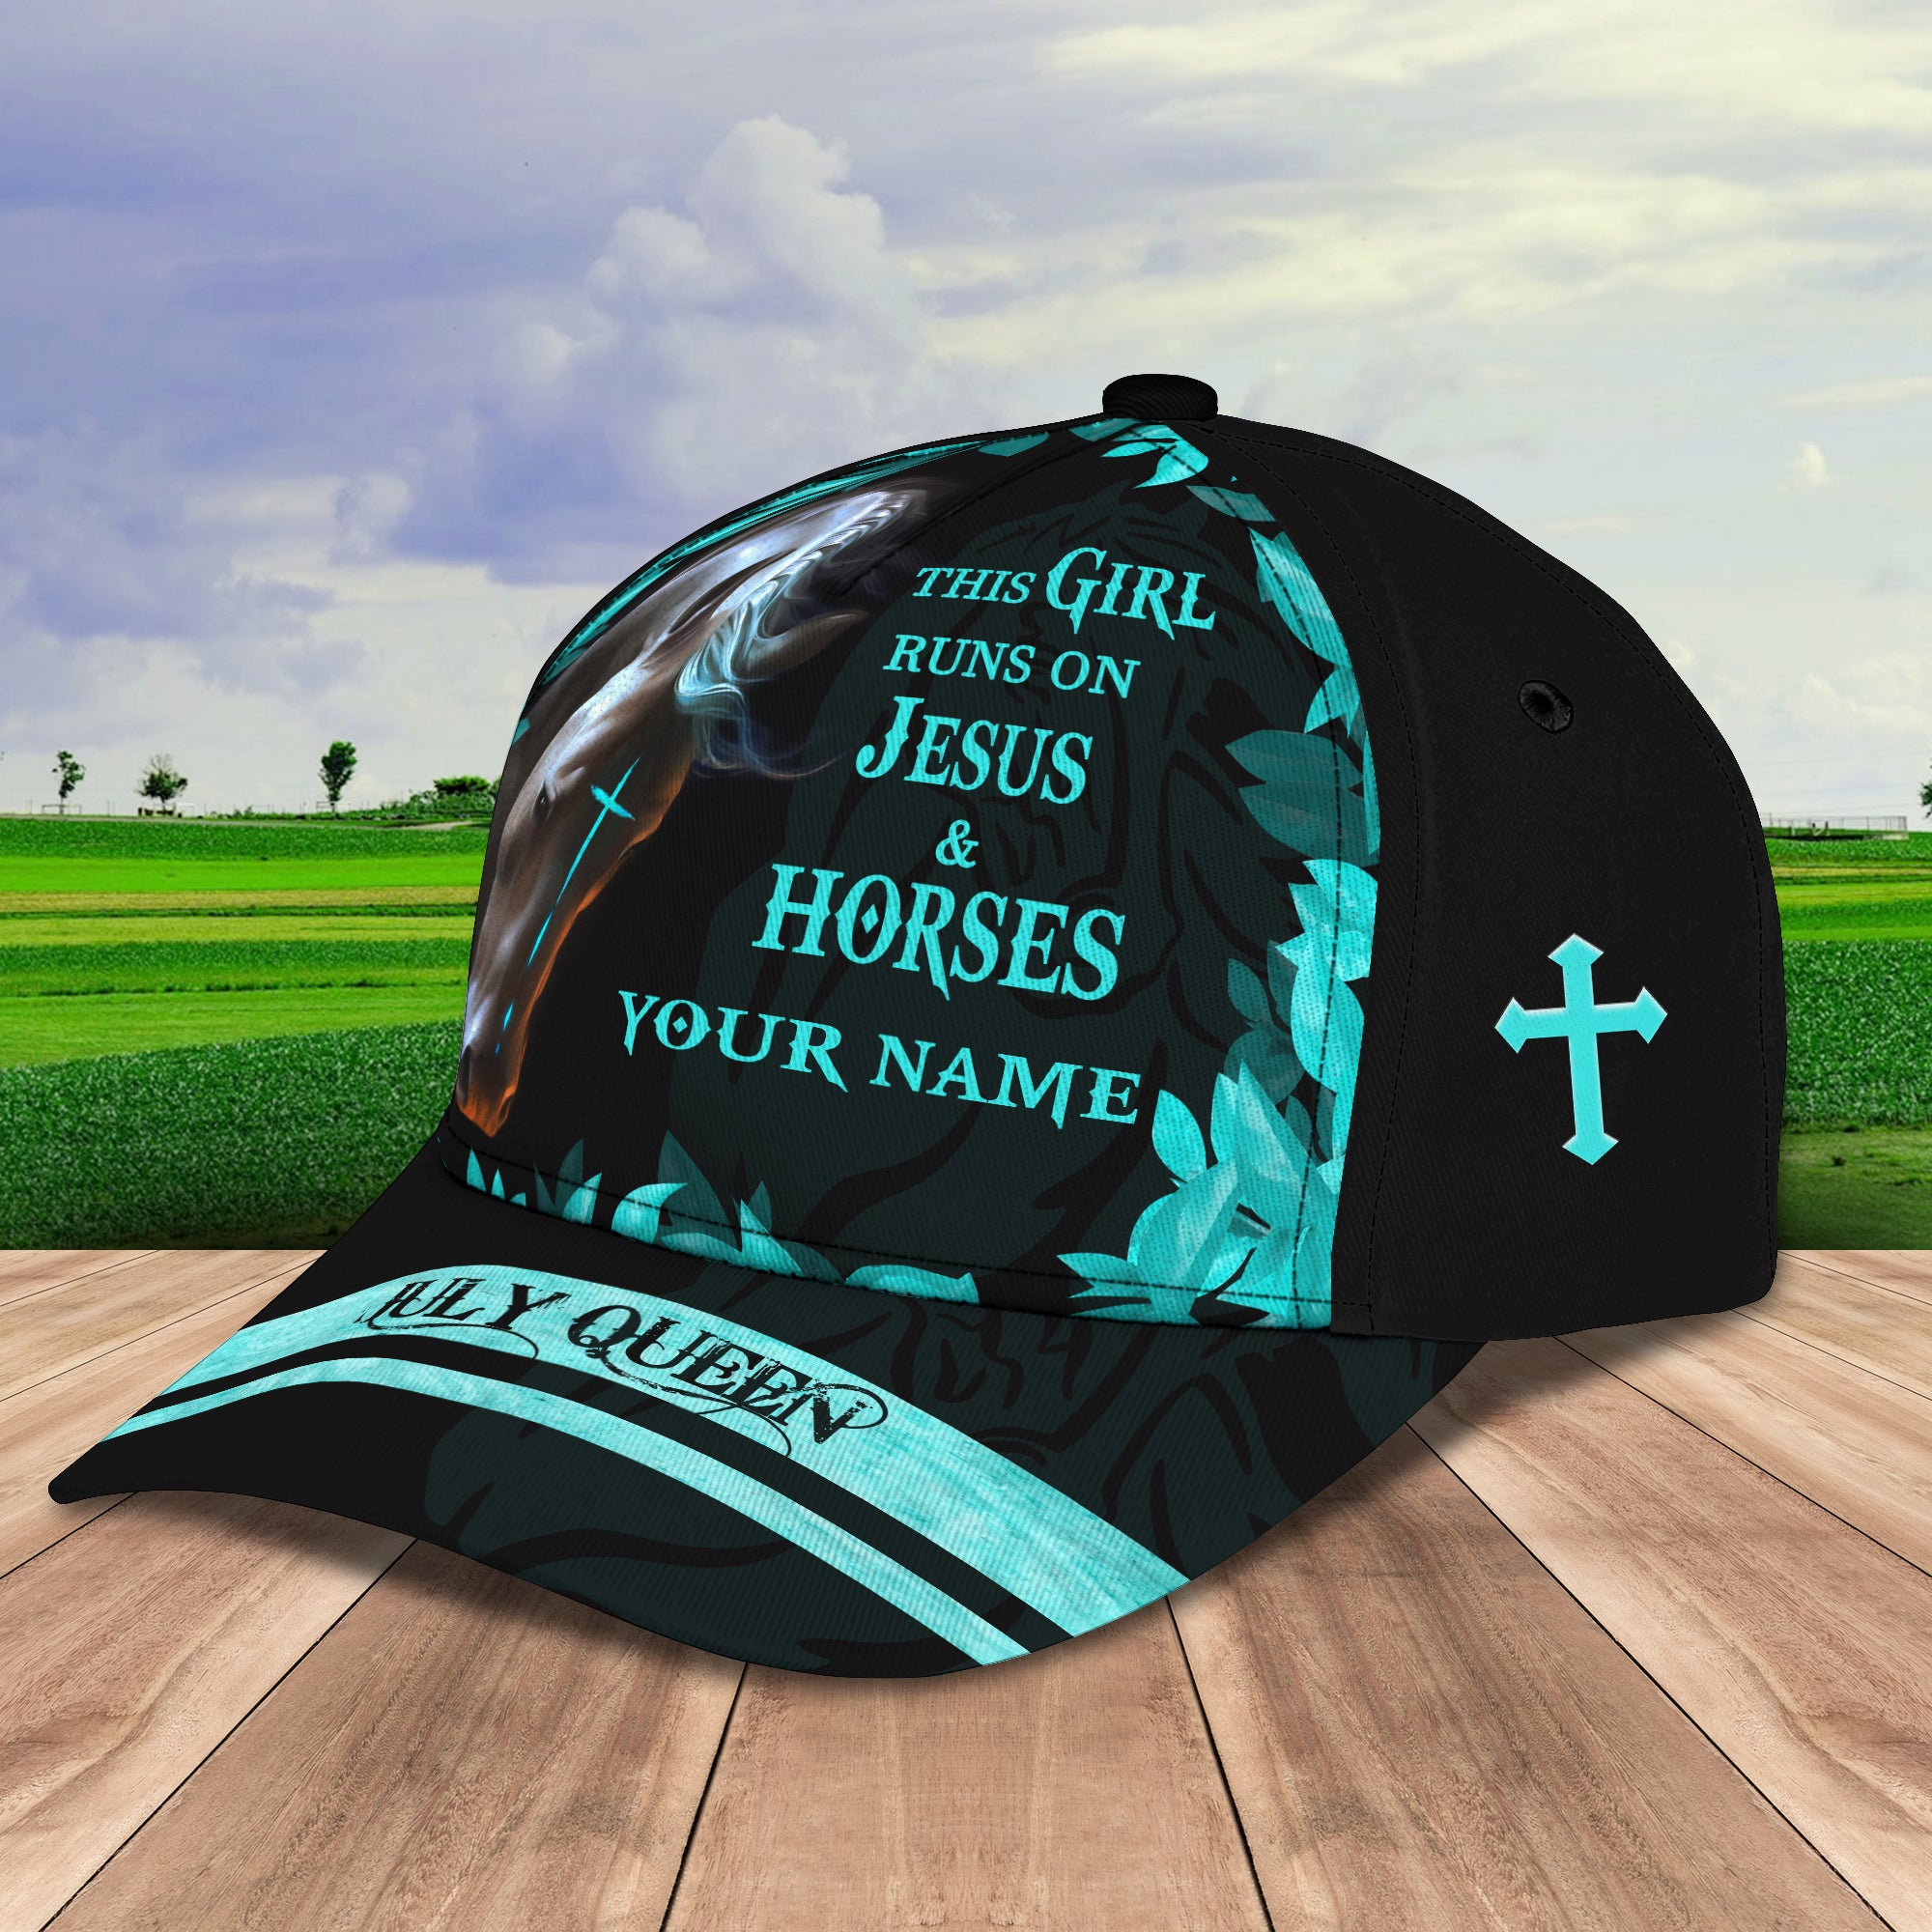 This Girl Runs On Jesus & Horses - July Queen - Personalized Name Cap 20 - Tad